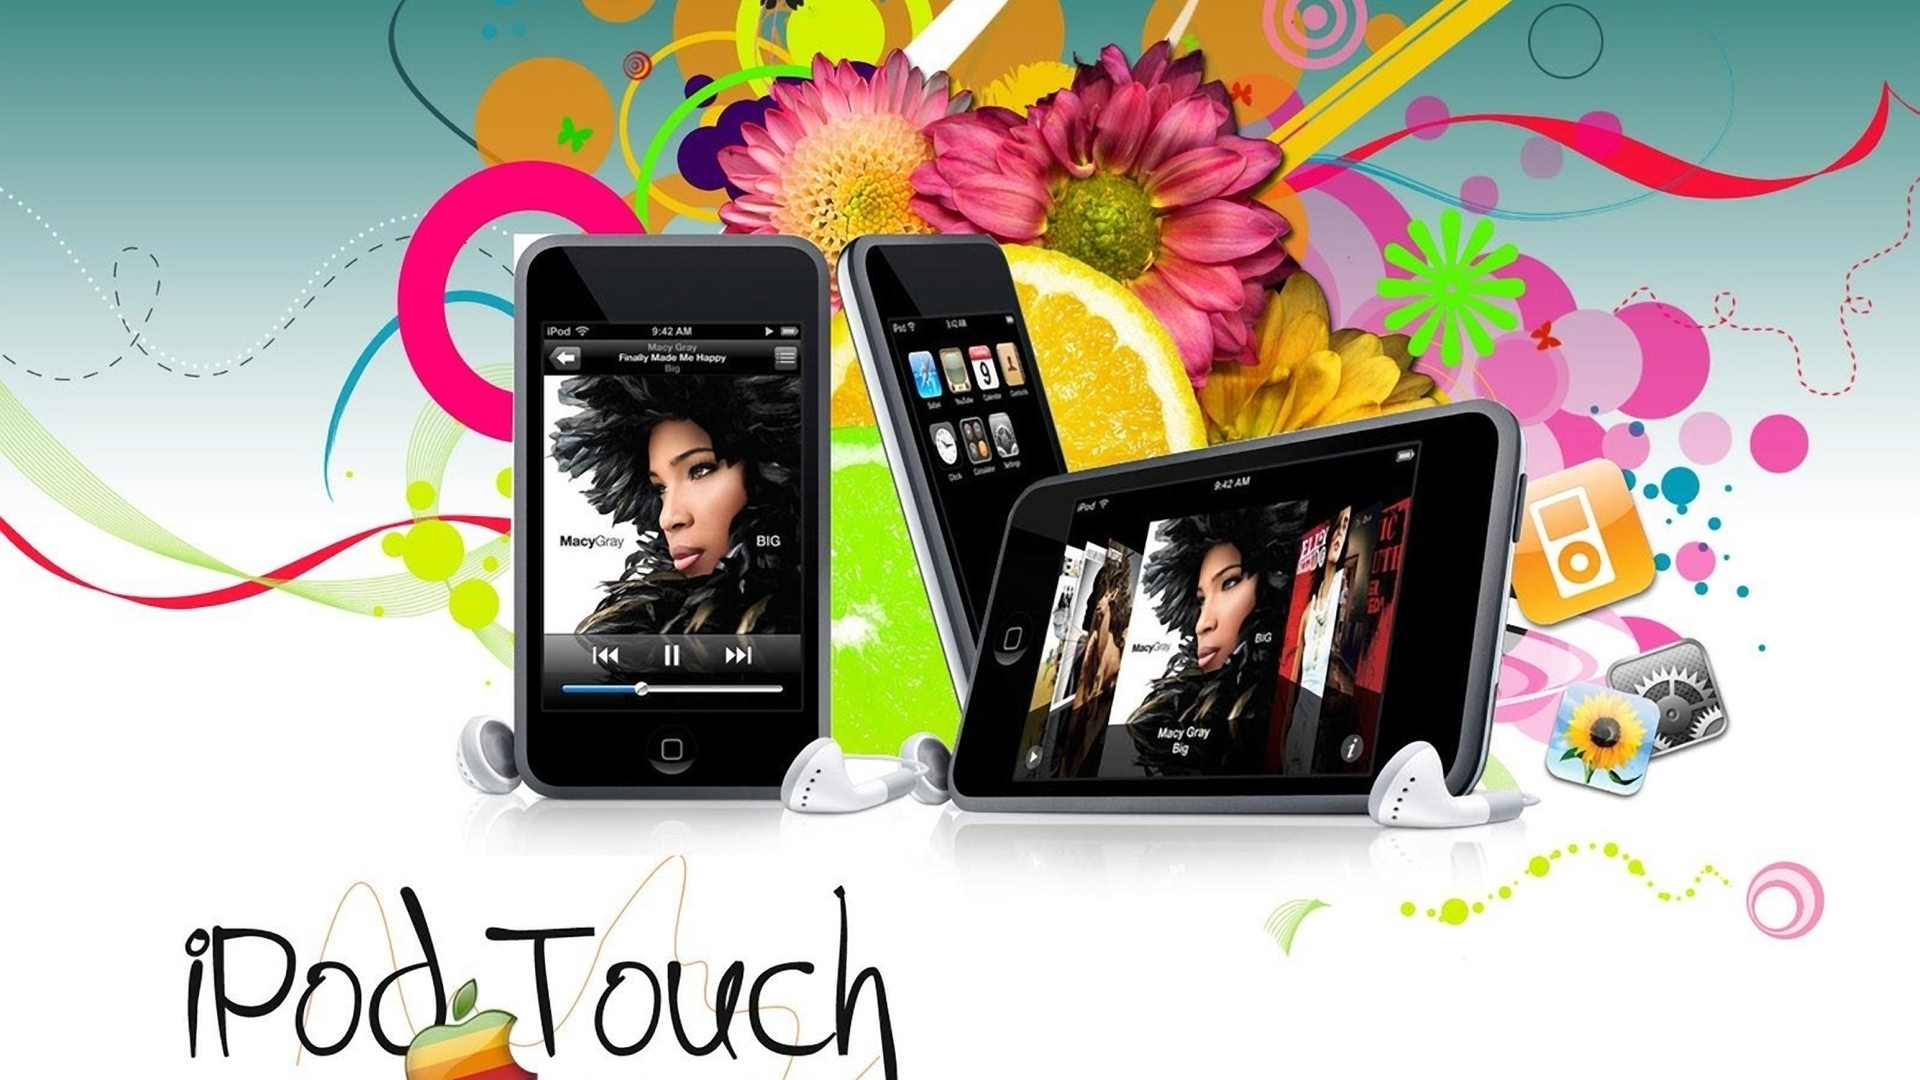 Cool iPod Touch for 1920 x 1080 HDTV 1080p resolution